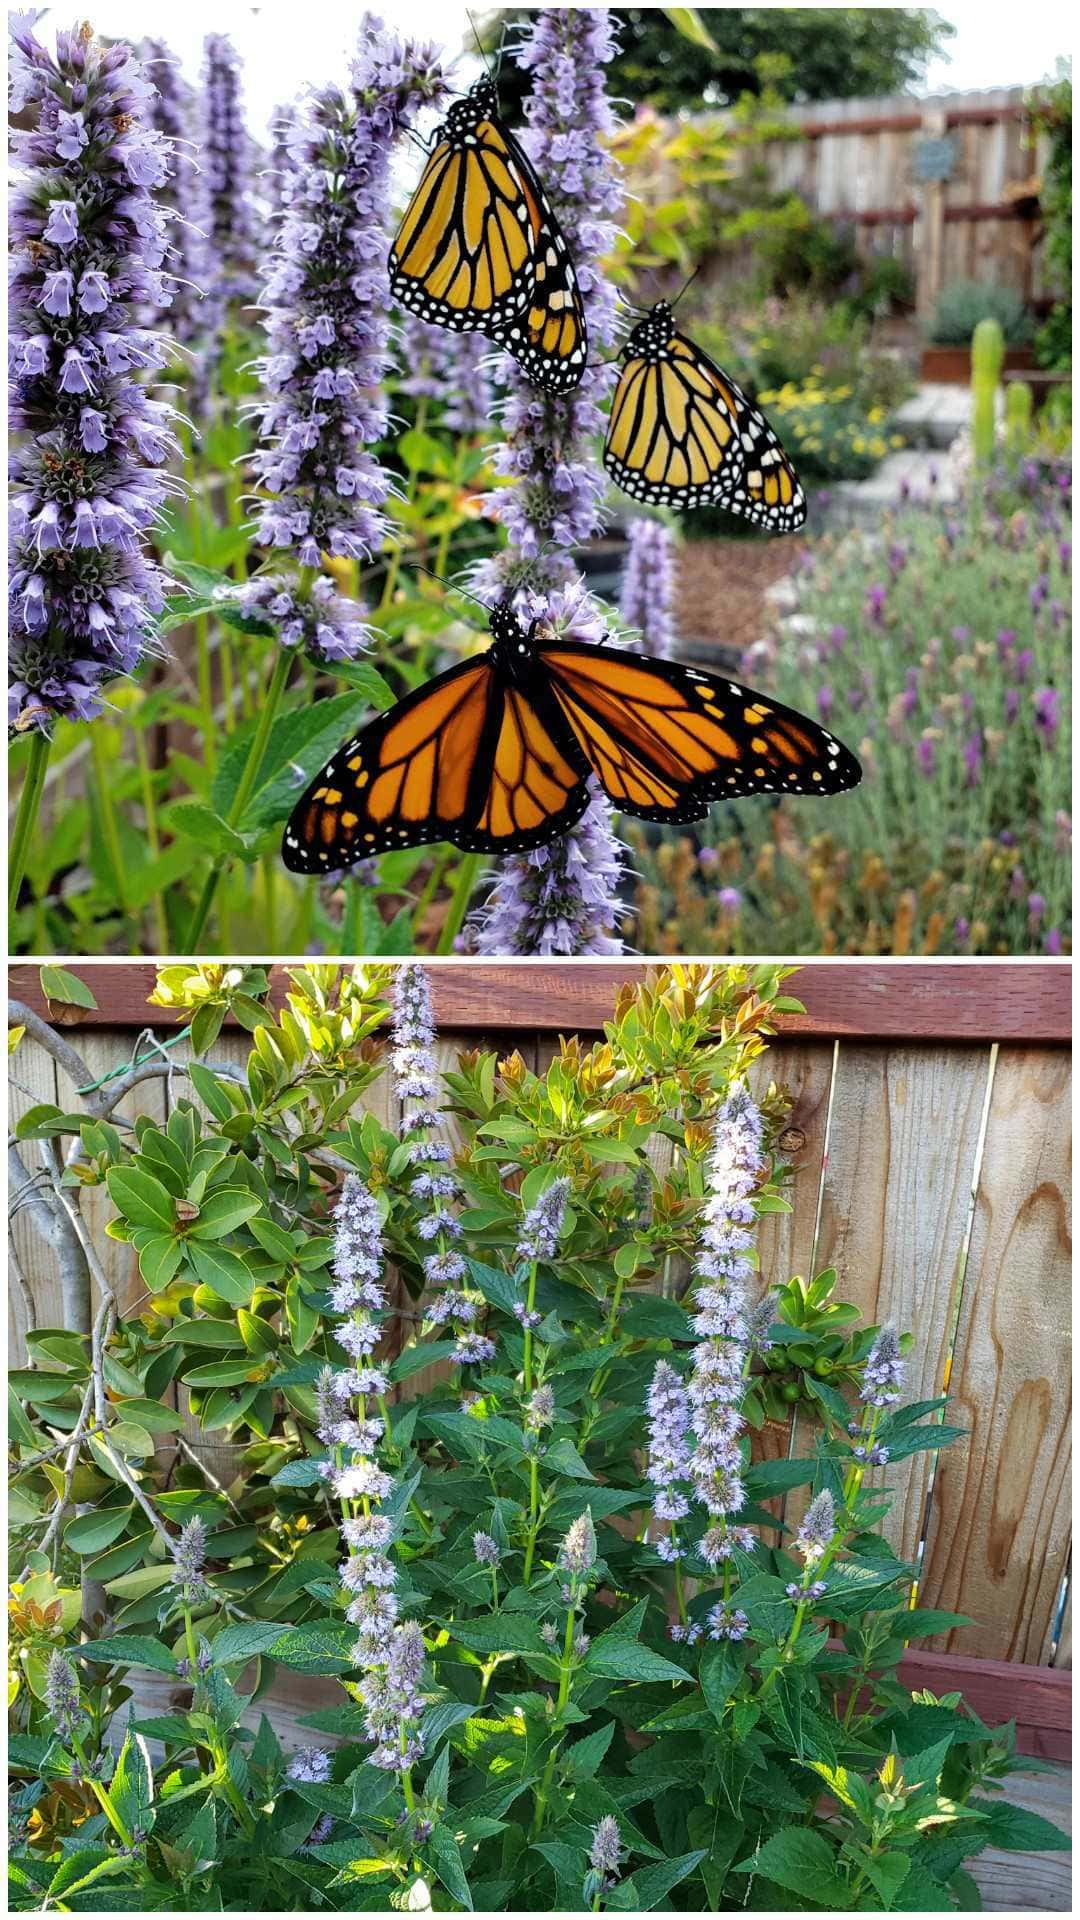 A green bushy anise hyssop plant with tall skinny light purple blooms. On the purple flower spikes are three orange, black and white monarch butterflies. Anise hyssop is a wonderful plant for pollinators, but also medicinal for people too. 